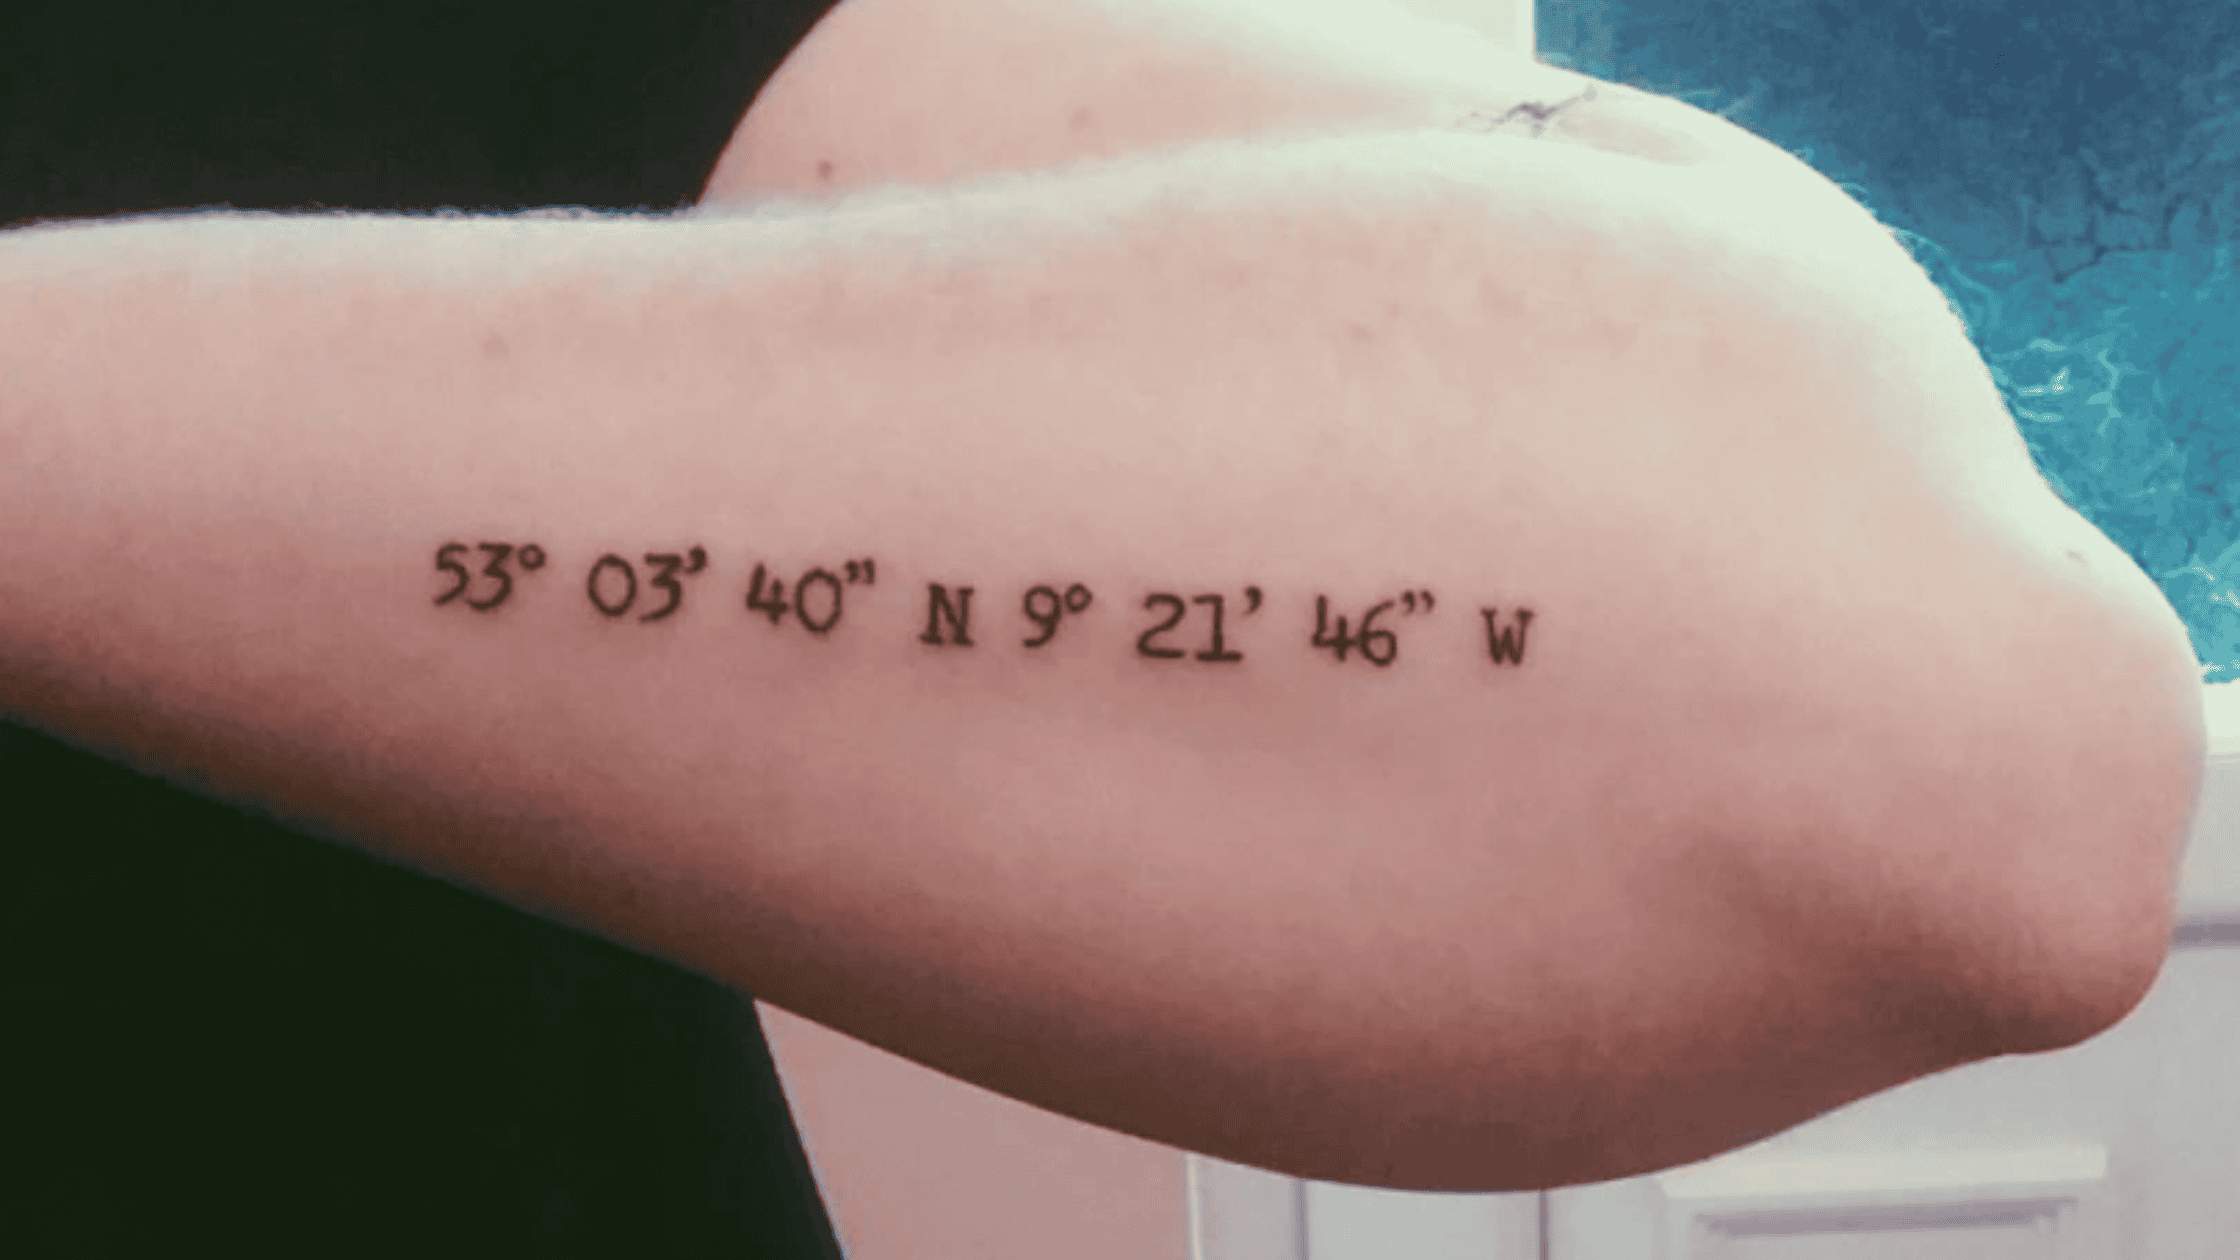 Coordinates Tattoo: The Exact Coordinates of the Child’s Place of Birth or a Significant Location